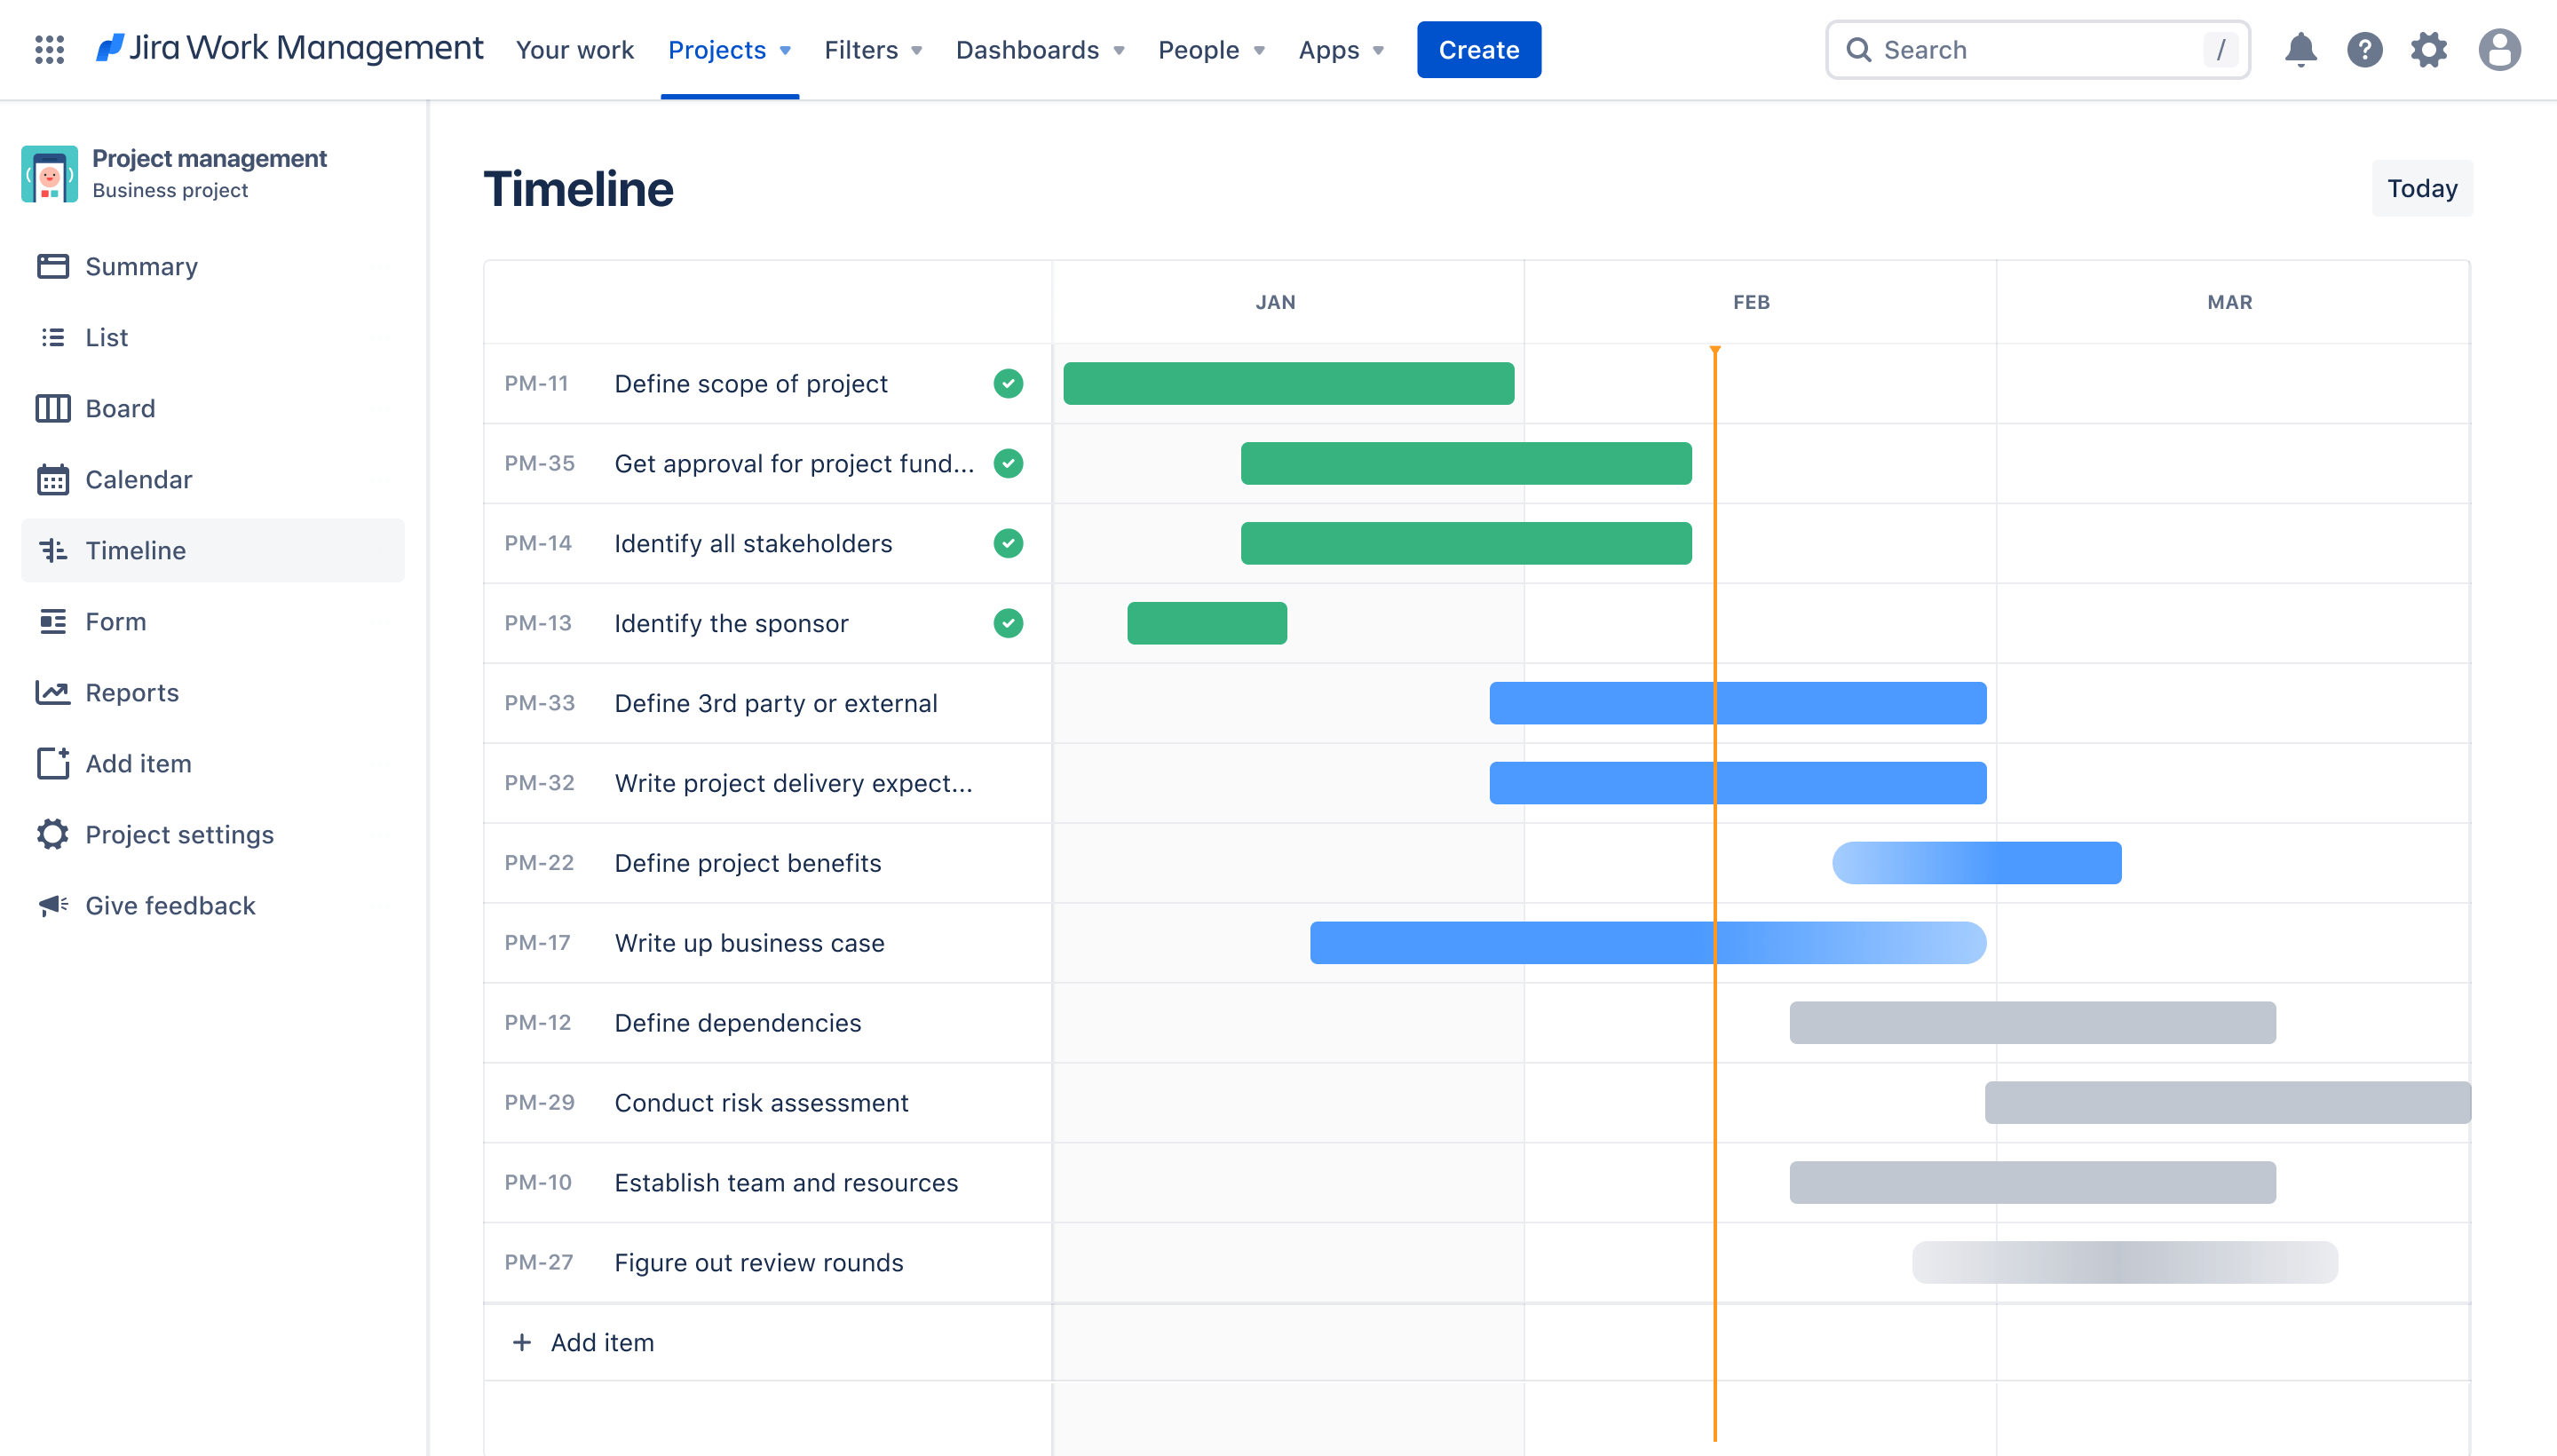 Project management tool: Jira